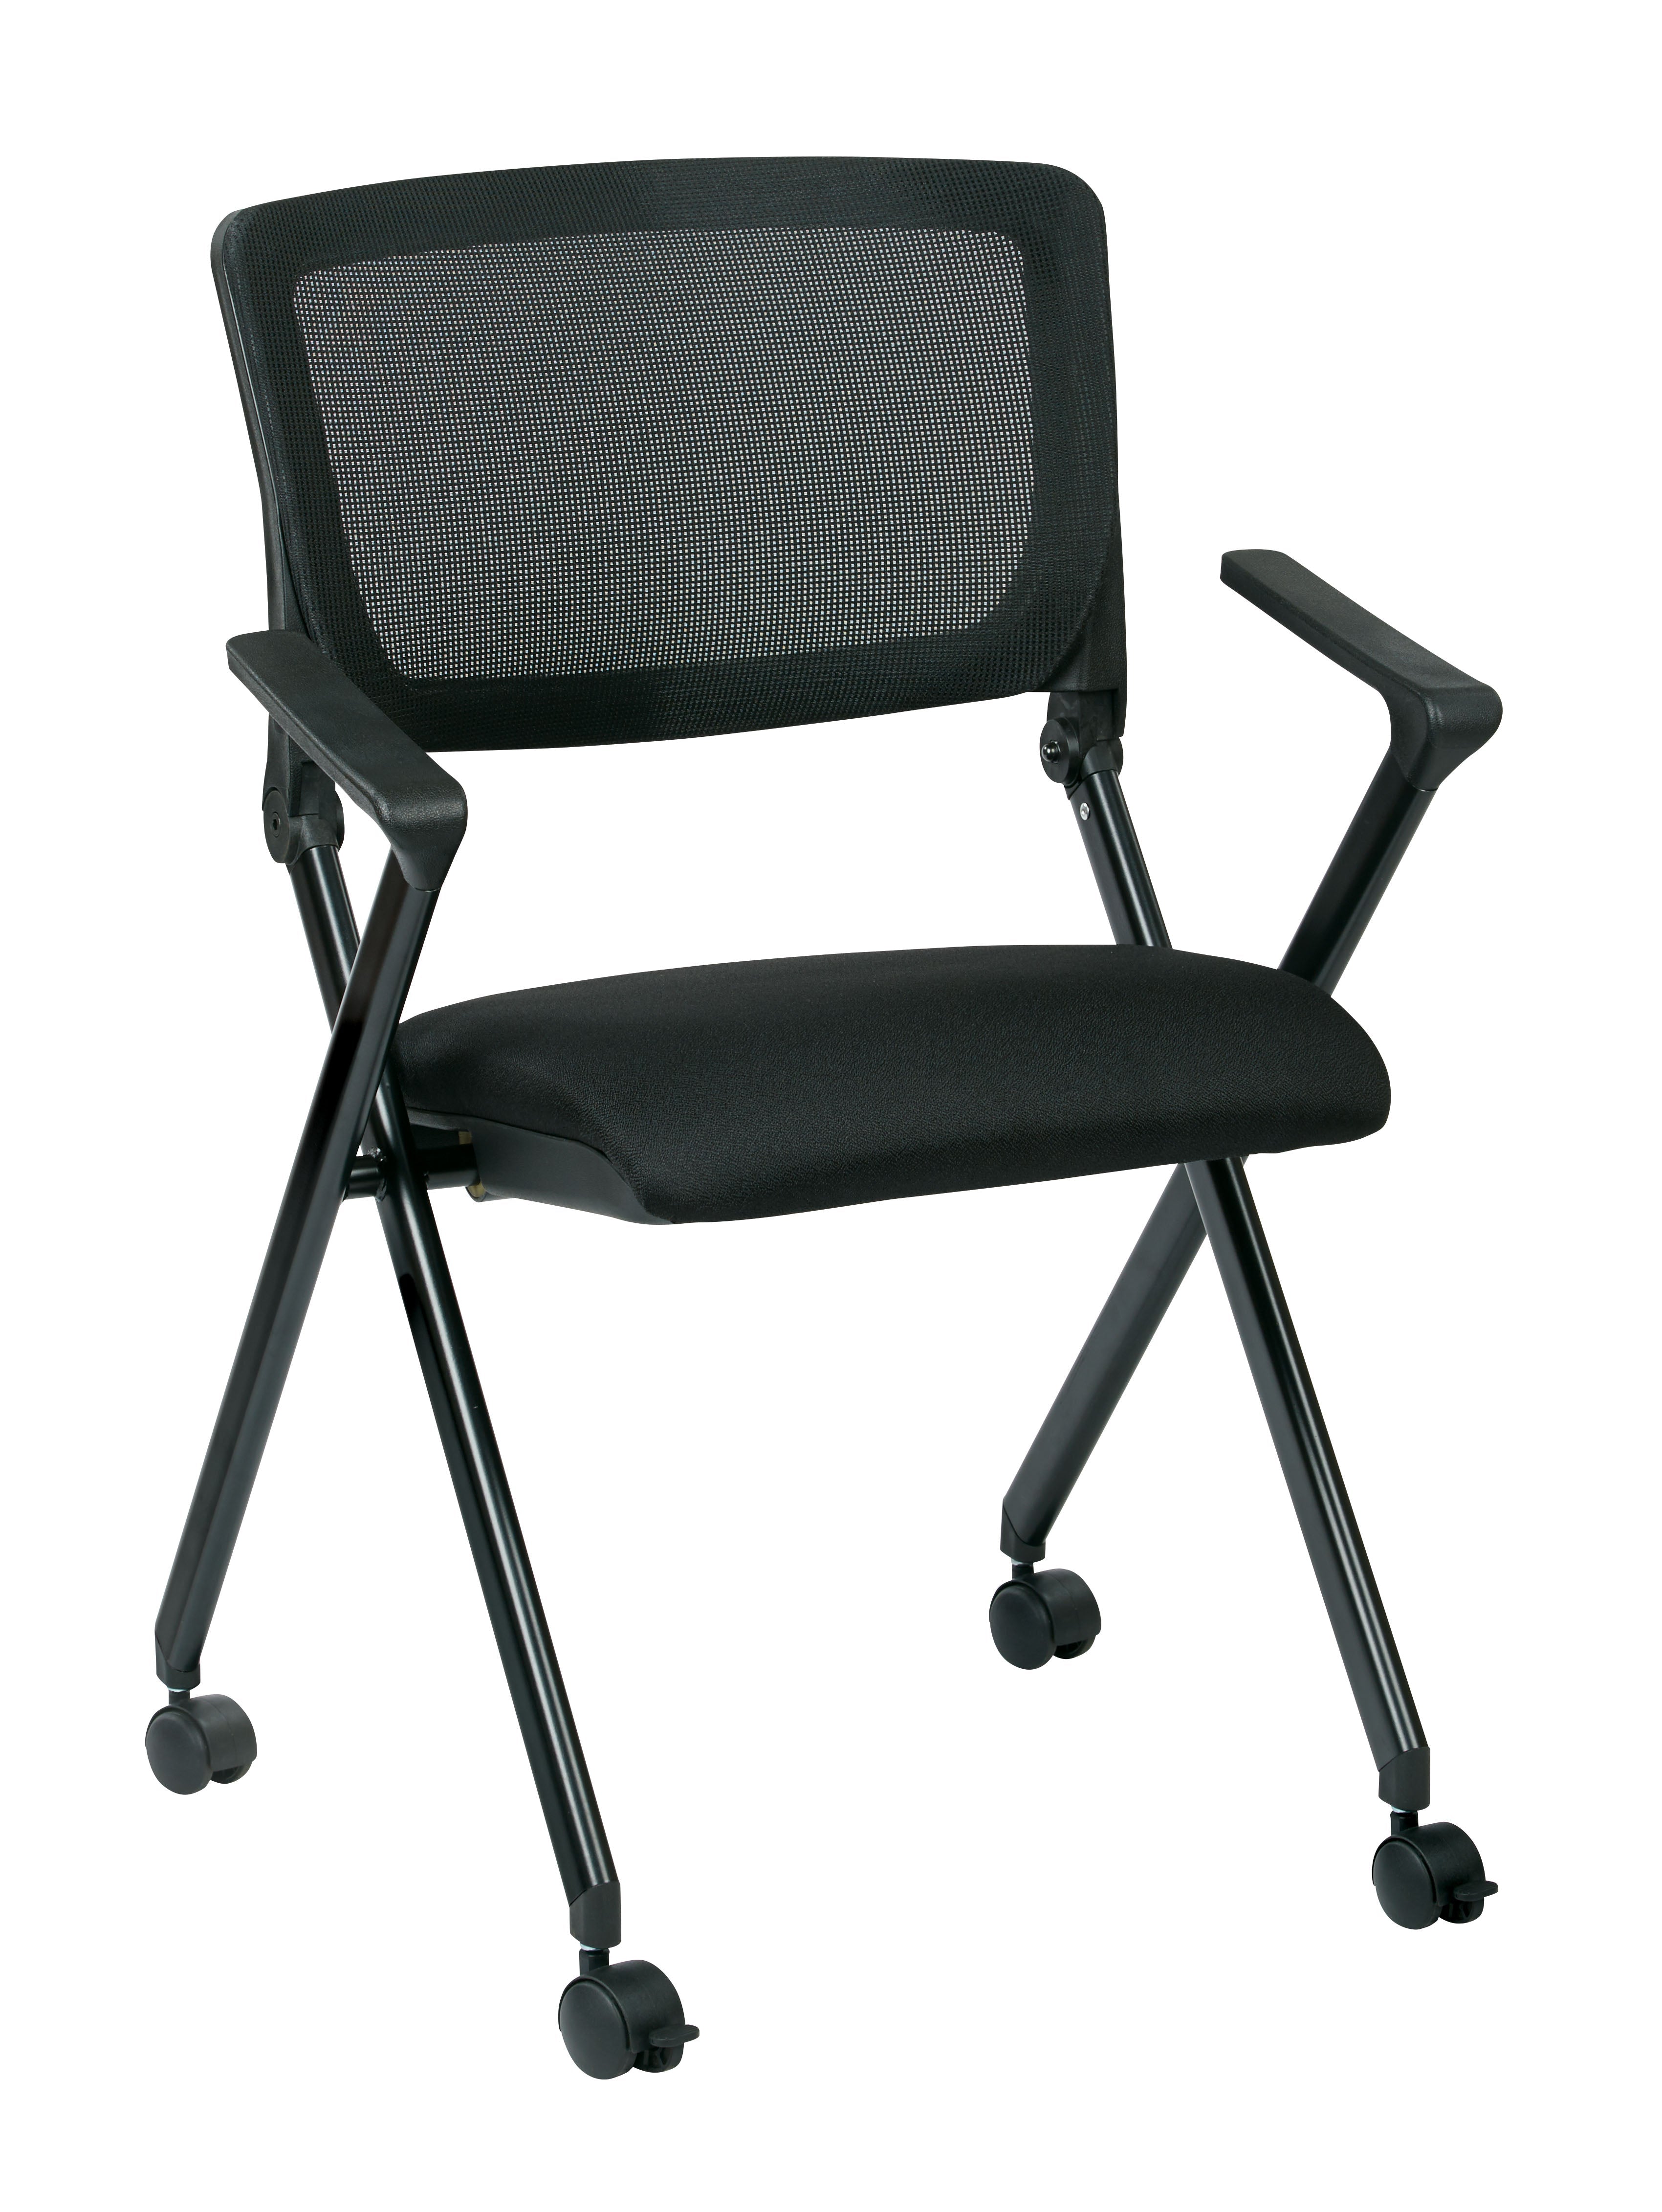 Folding Chair with breathable Mesh Back (2-PK)